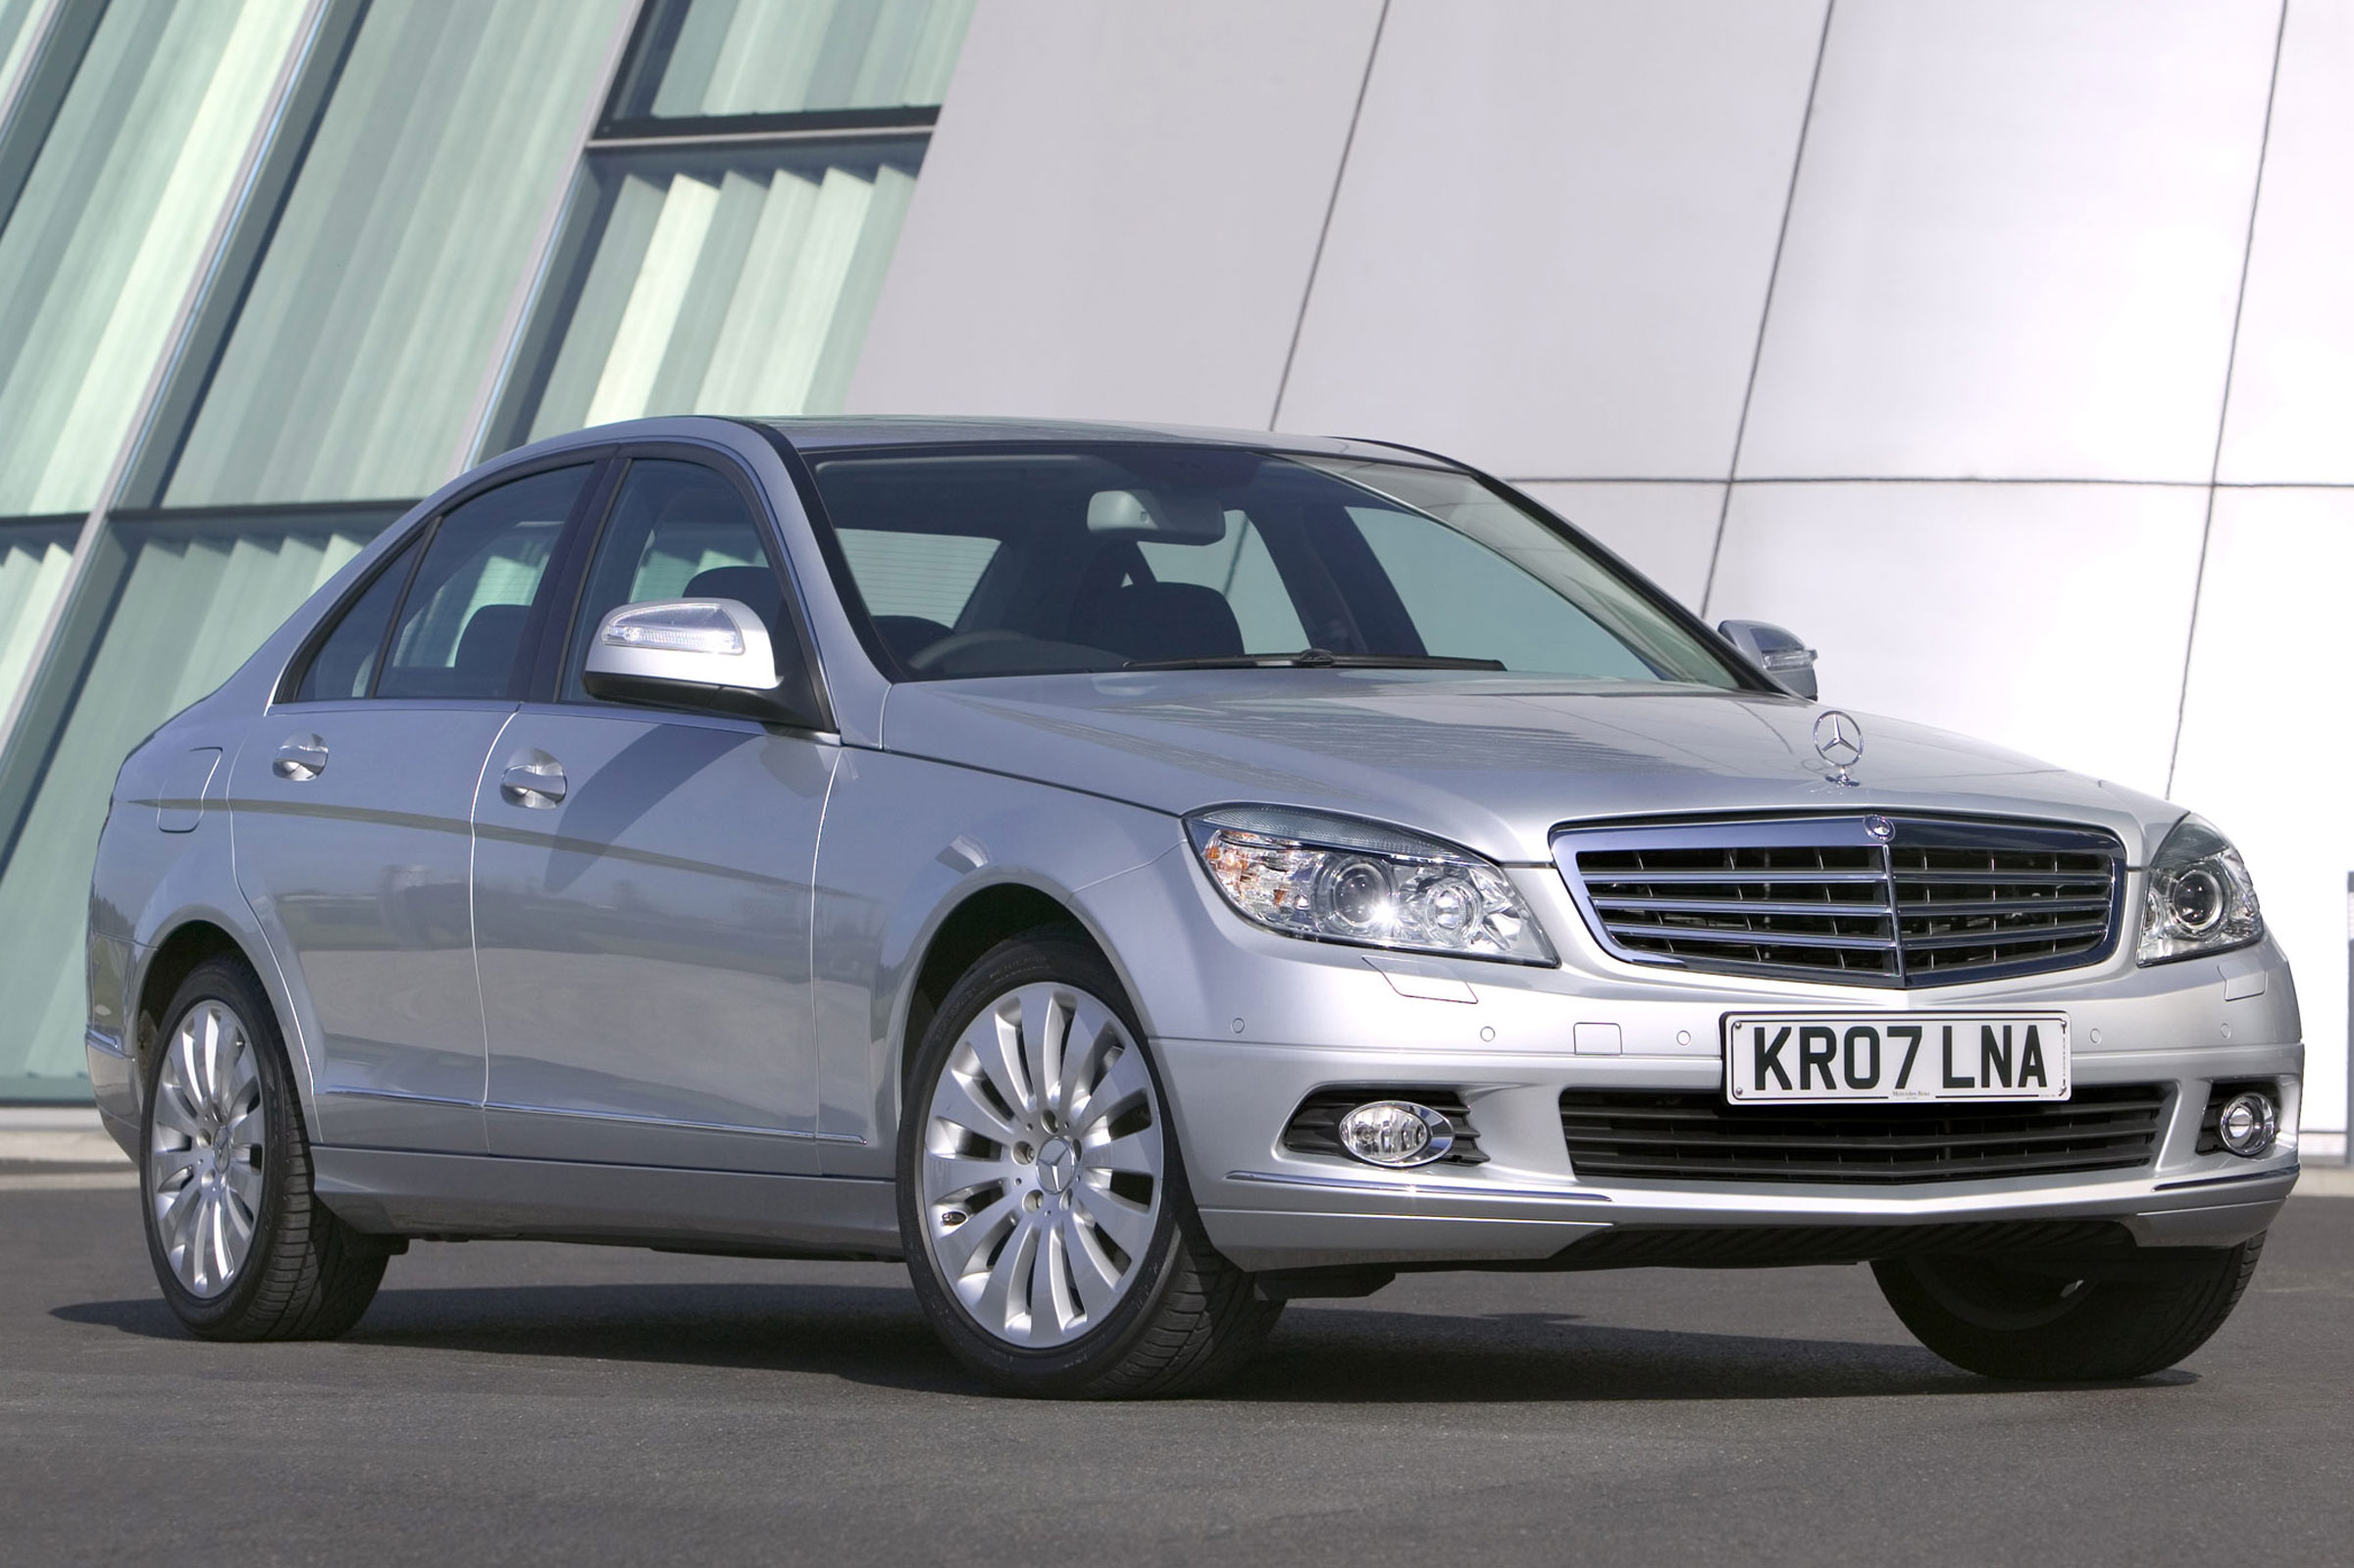 Used Mercedes C Class Buying Guide 07 14 Mk3 Carbuyer